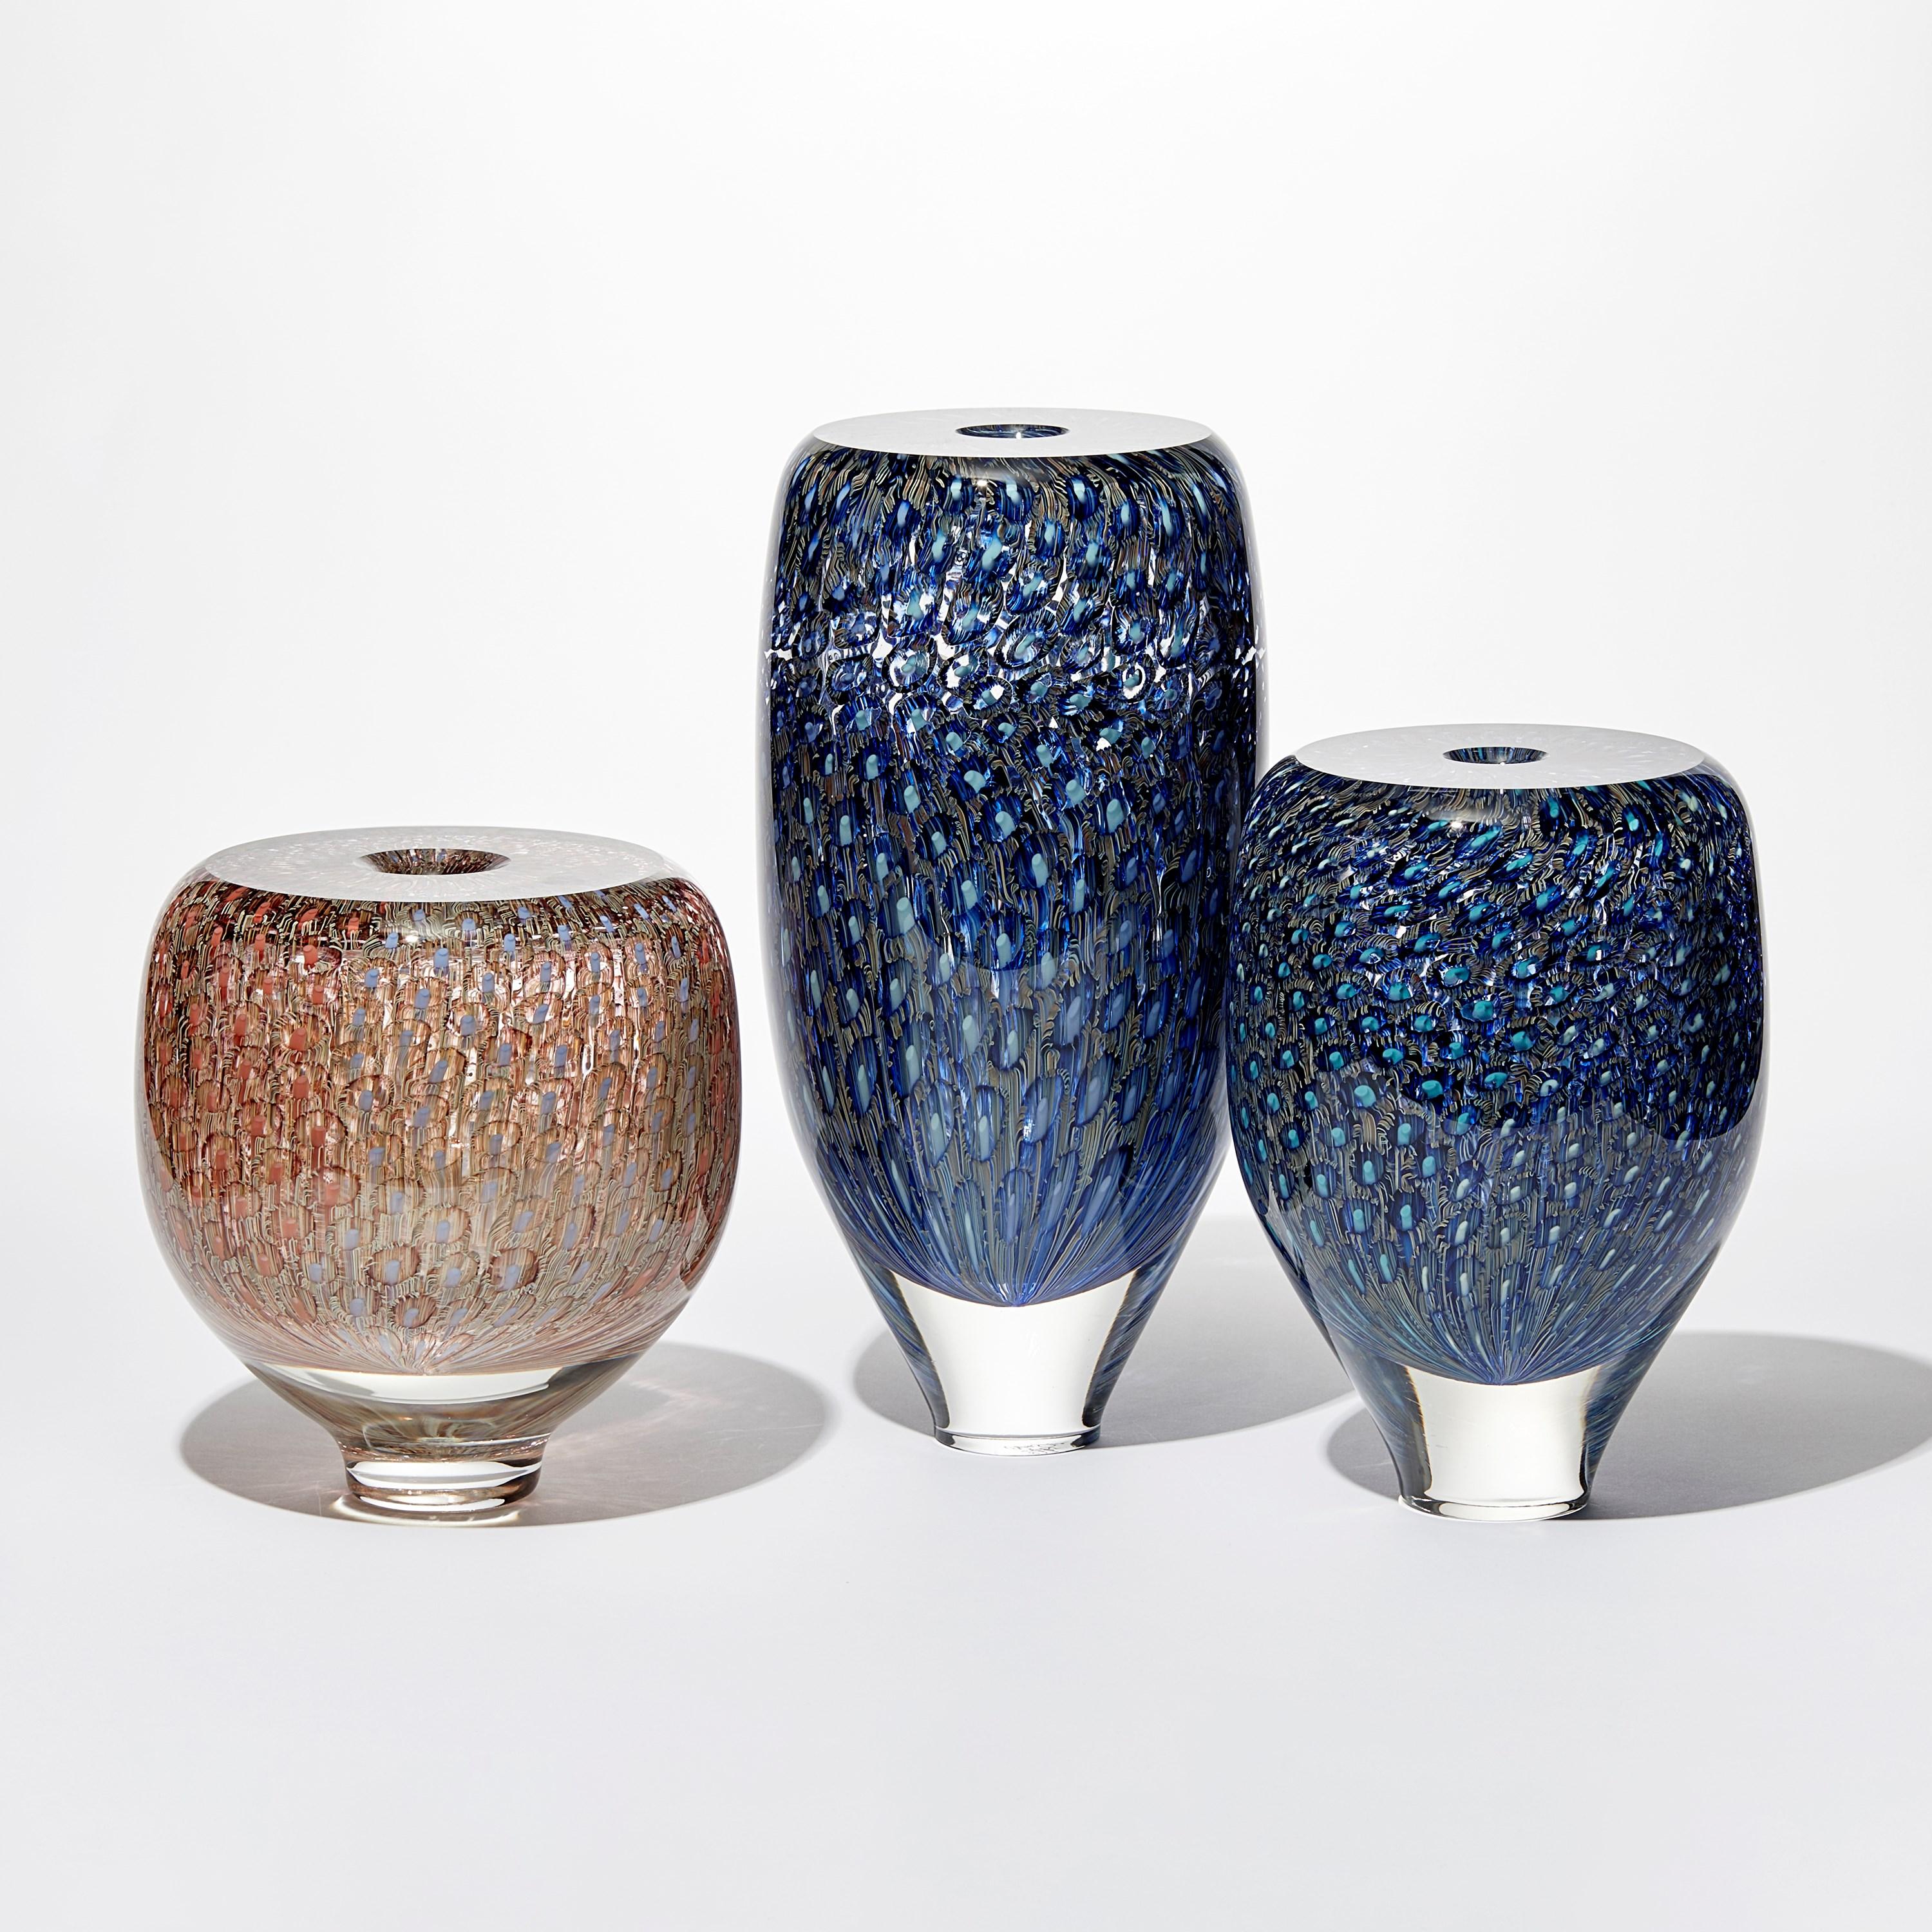 Contemporary  Murrine Quadrants in Pale Blue & Salmon I, patterned object by Pater Bowles